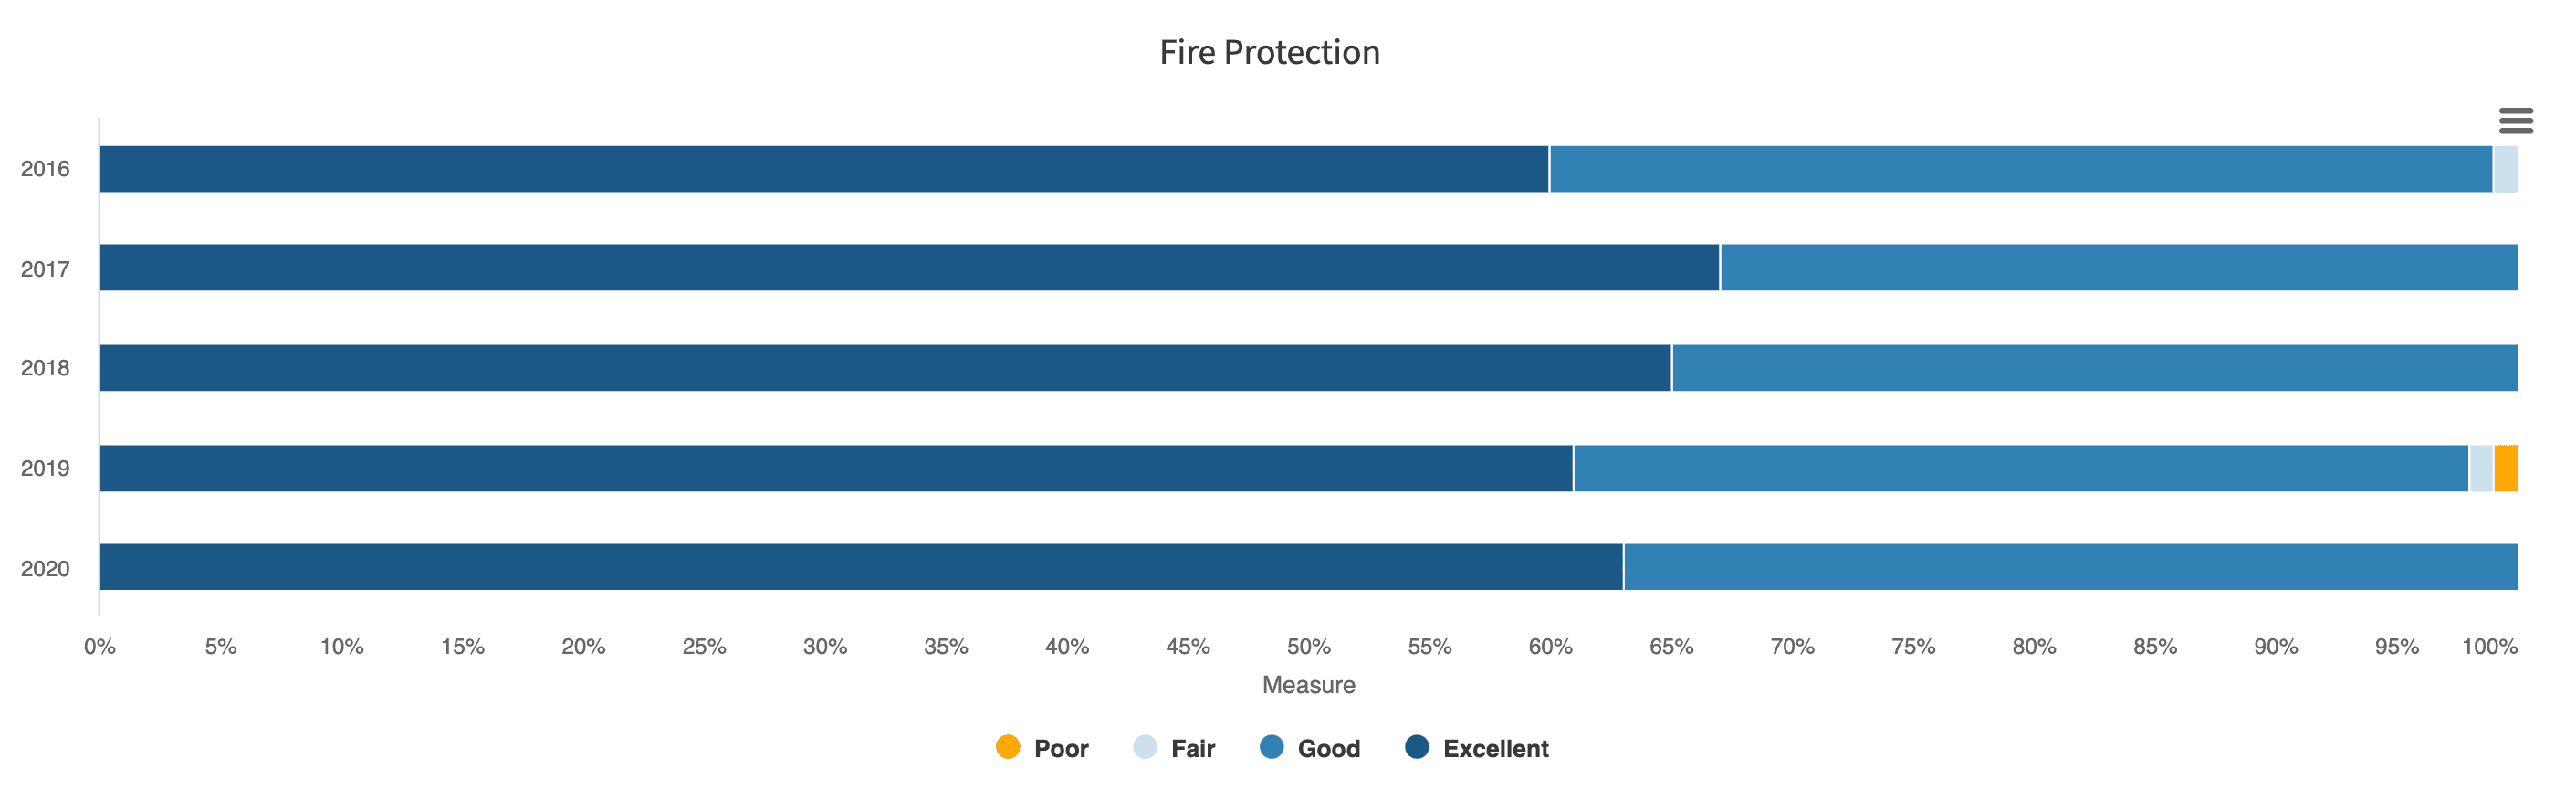 Screenshot of City of Minnetonka's resident satisfaction with fire protection services performance measures chart